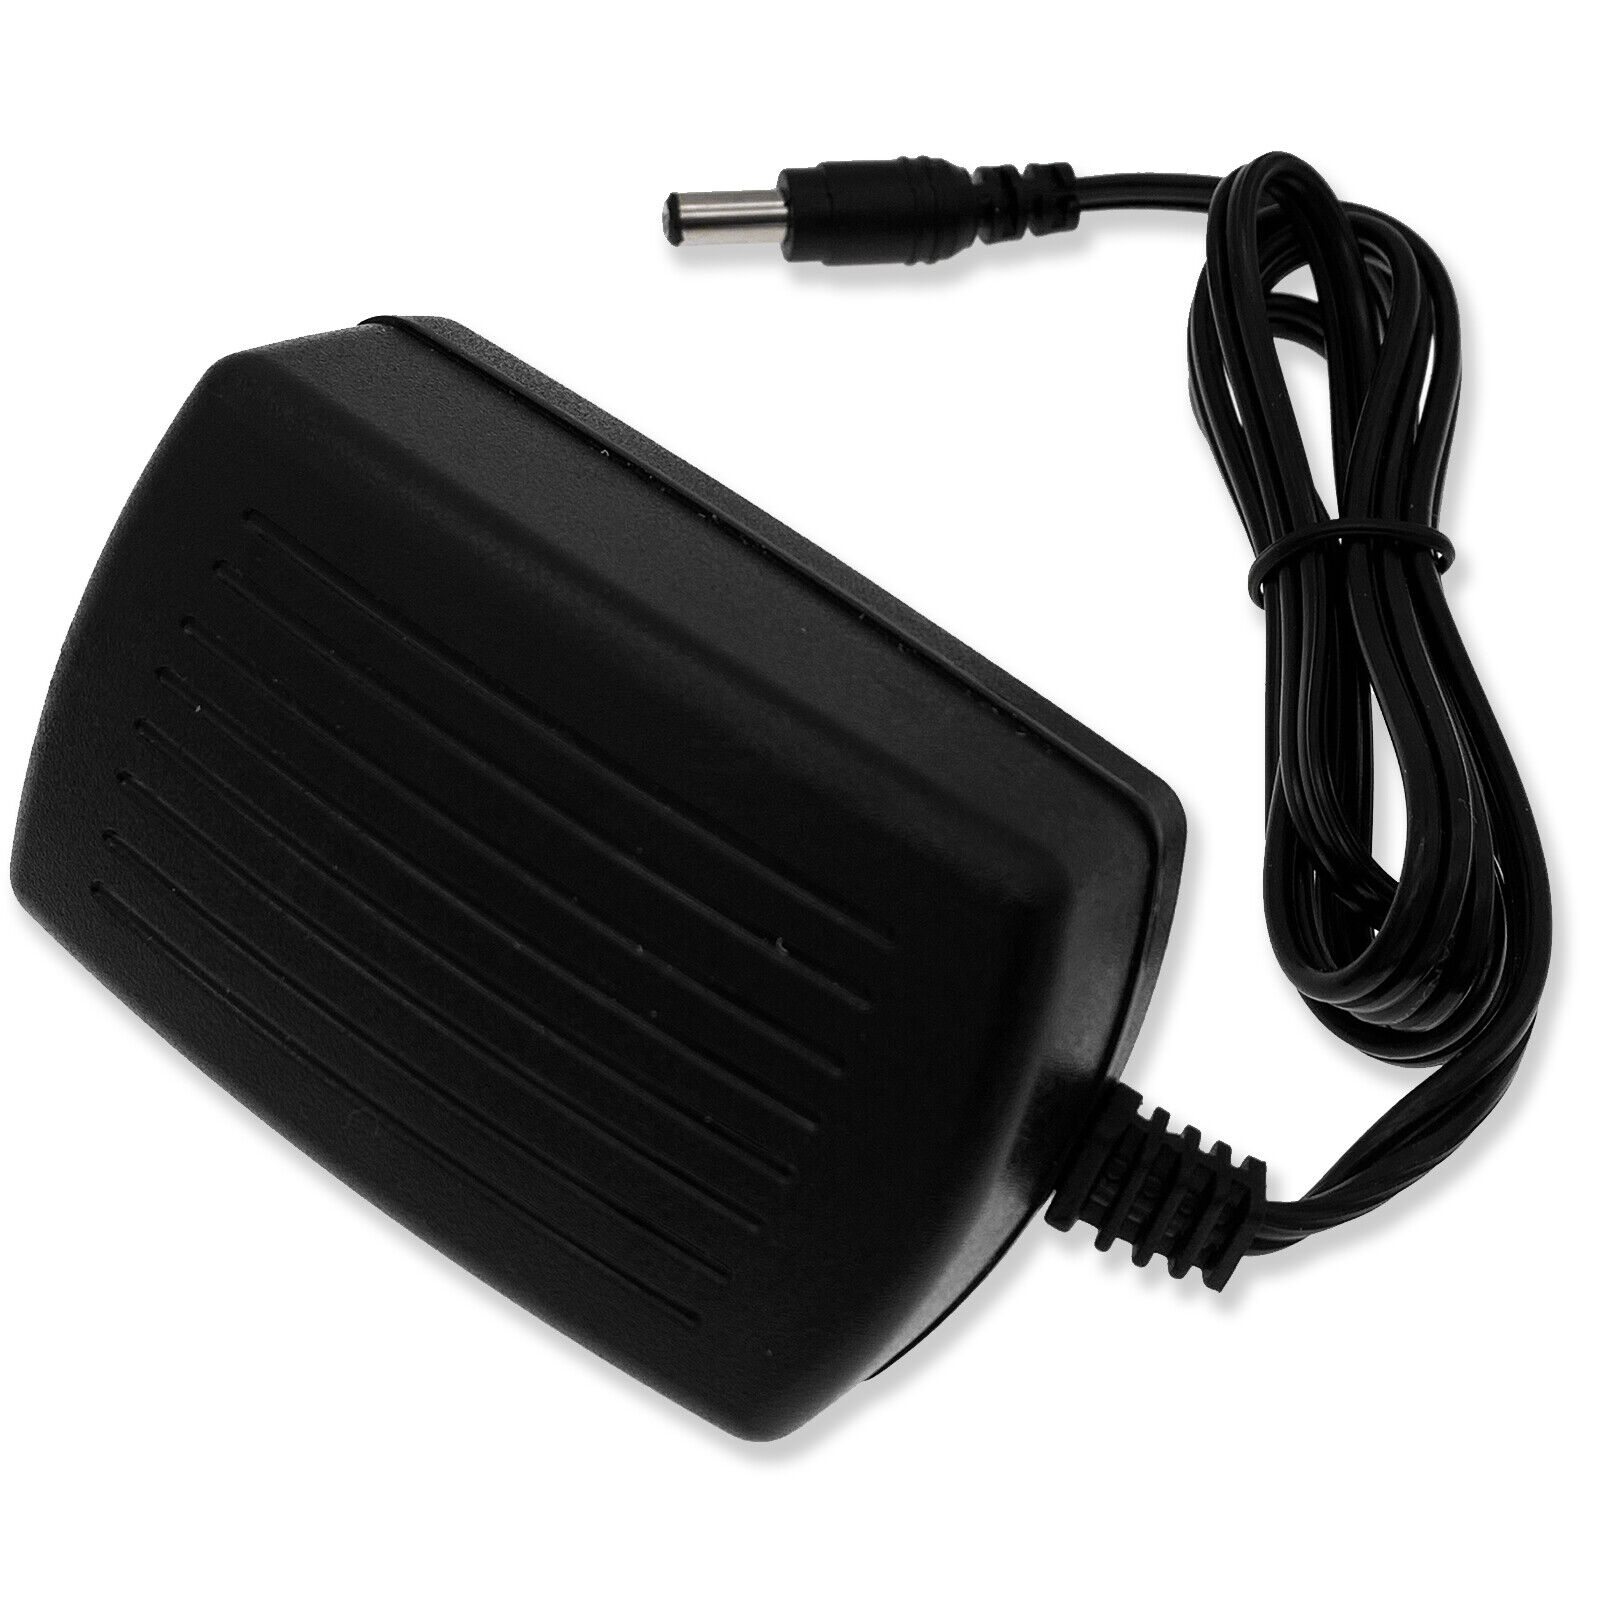 *Brand NEW*5v Charger AC DC ADAPTE Fit 10" VIMICRO VC882 GOOGLE ANDROID 4.0 TABLET PC Power